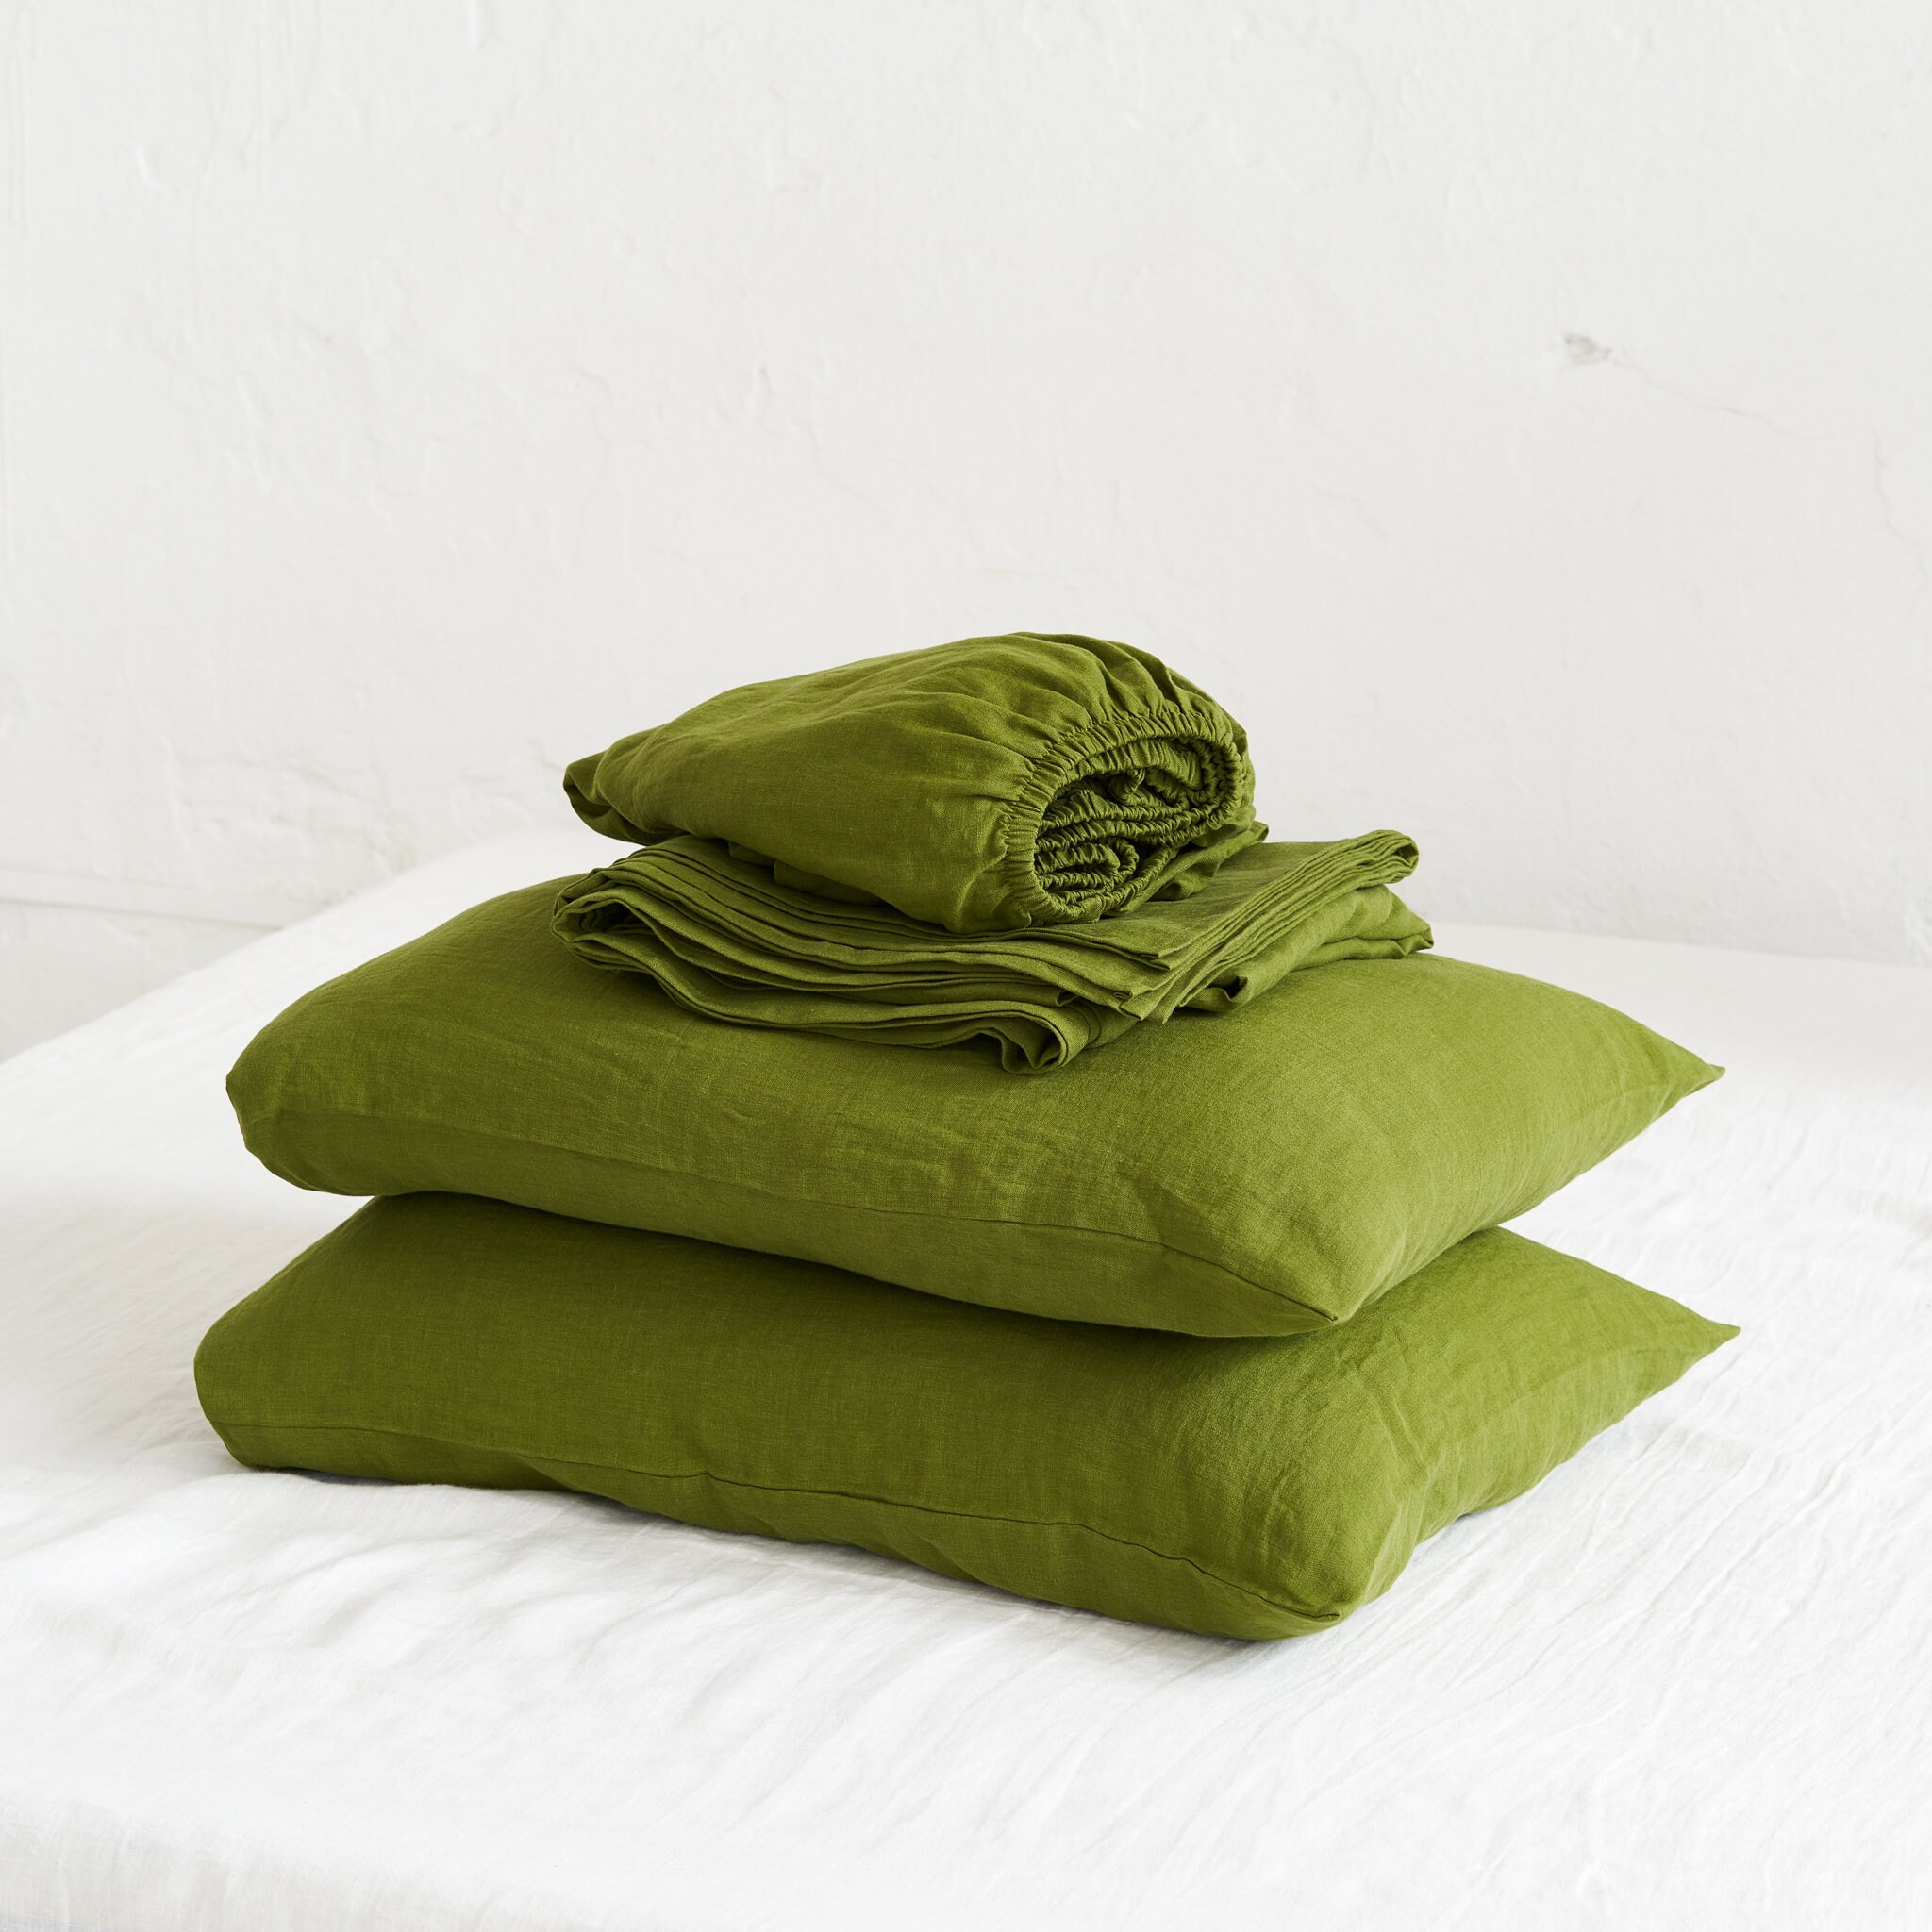 GREEN MOSS PURE NATURAL STONE WASHED LINEN FITTED SHEET SOFT NATURAL BEDDING